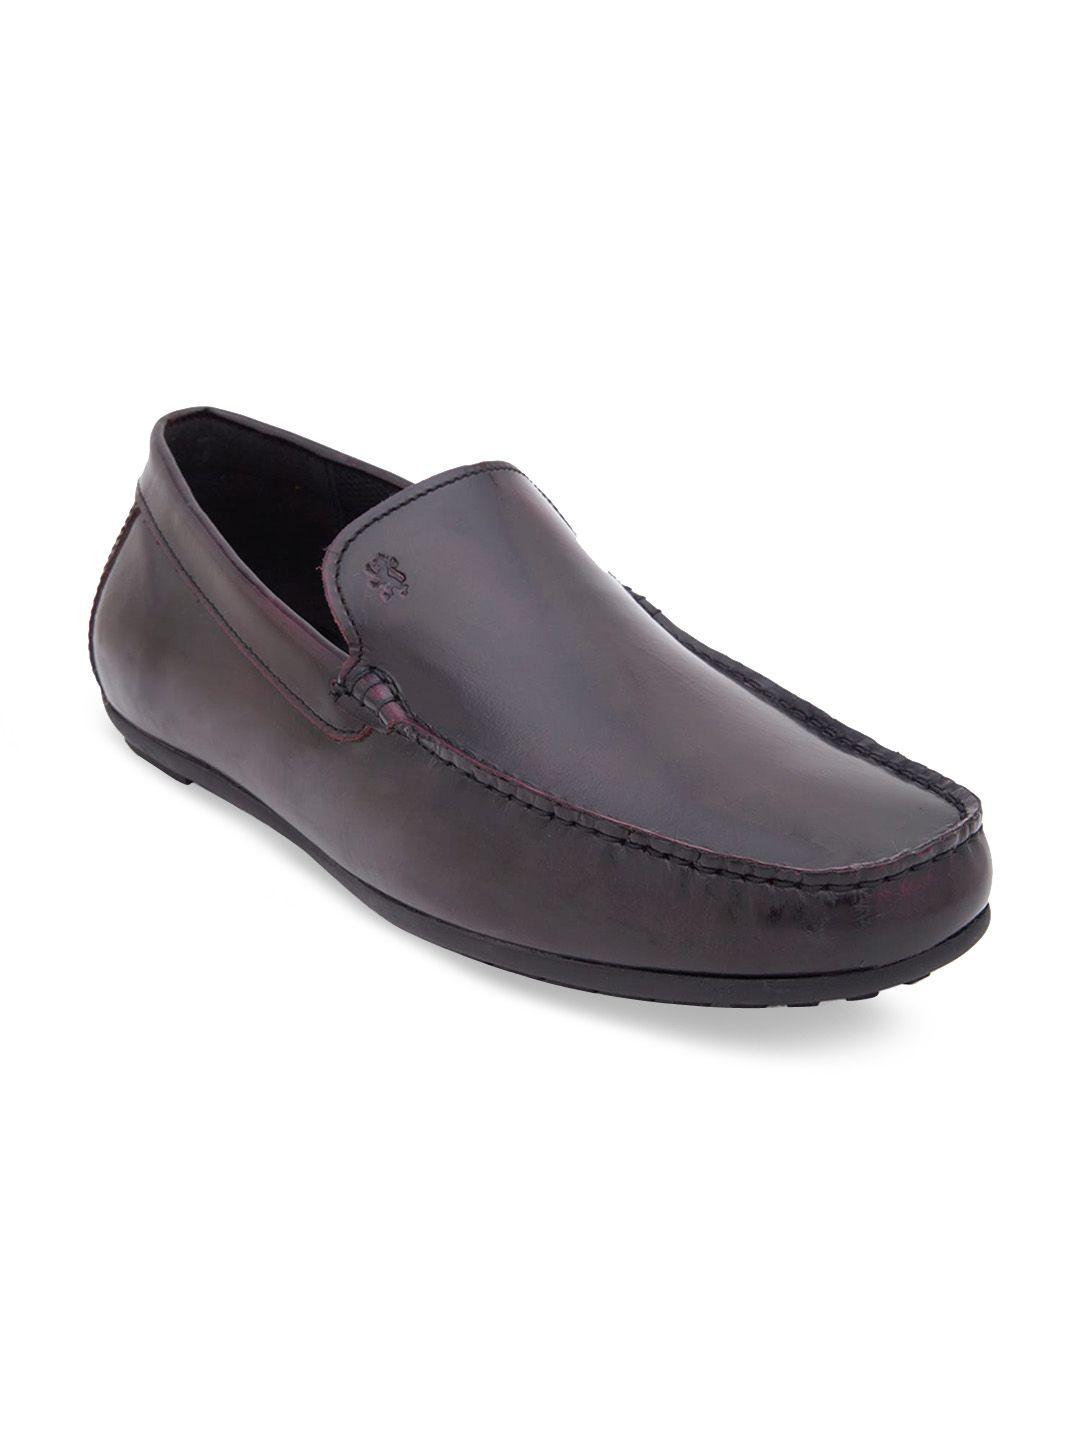 red tape men brown solid leather formal loafers